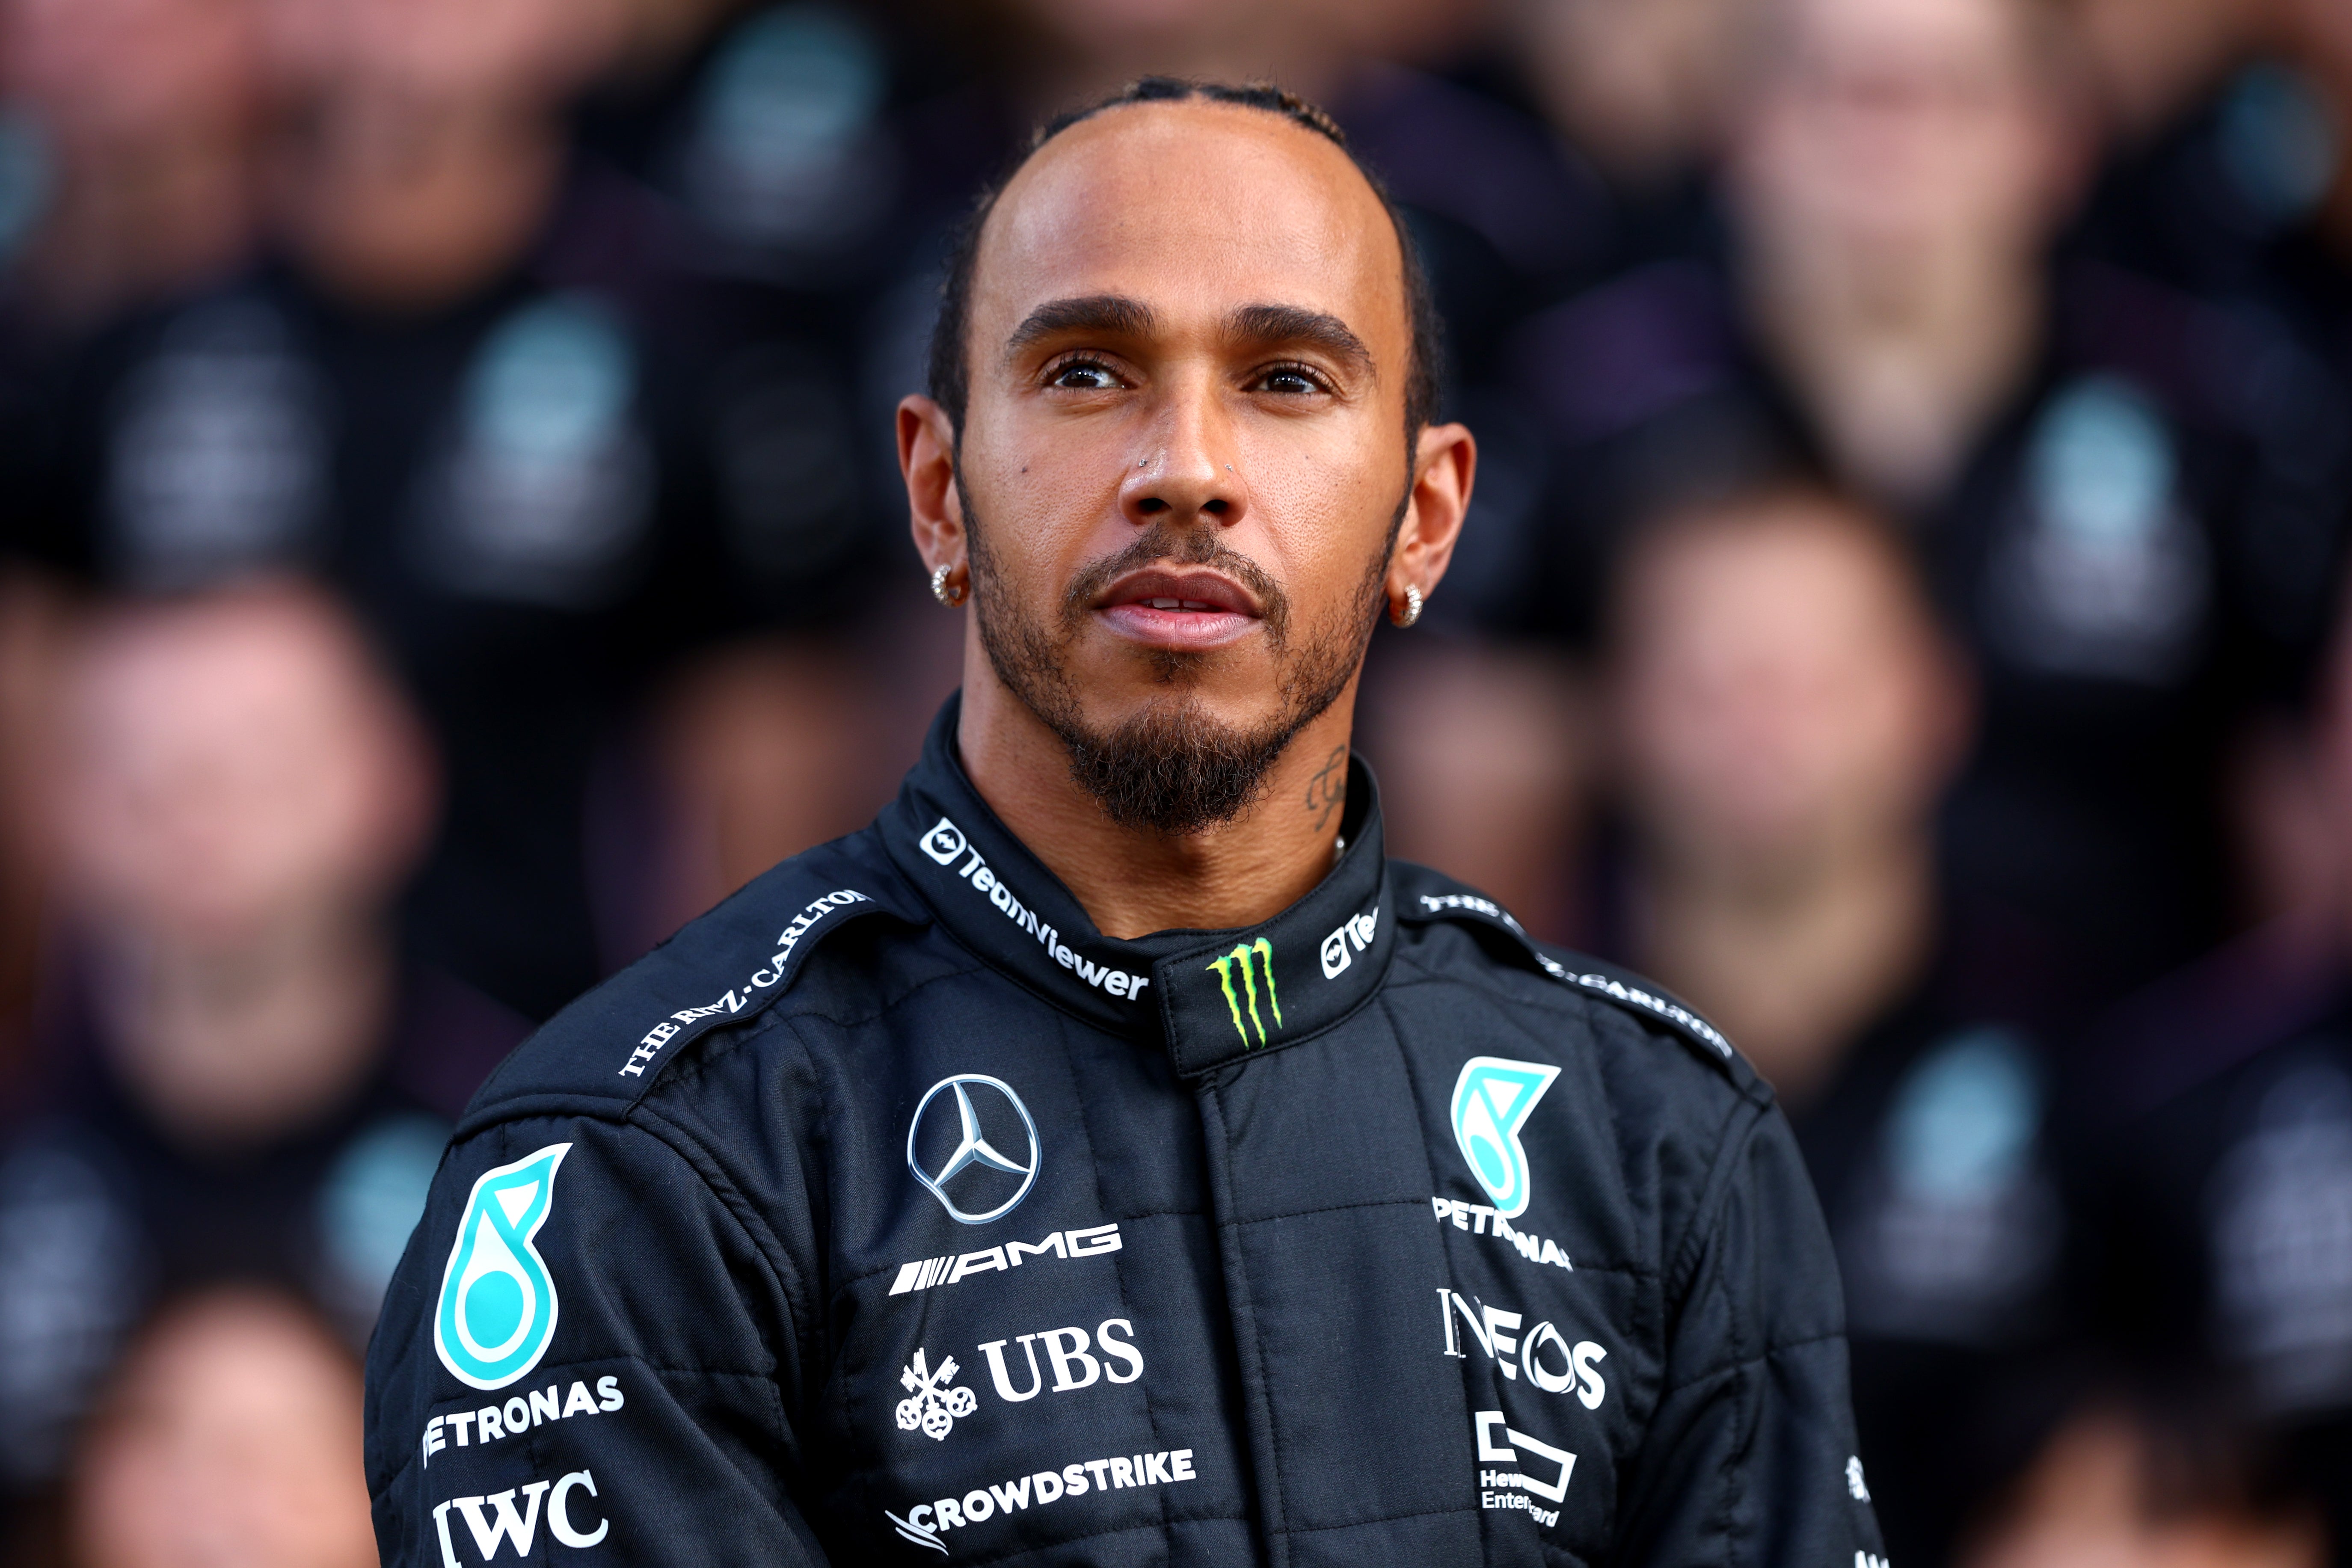 Lewis Hamilton will join Ferrari in 2025 in a shock move away from Mercedes